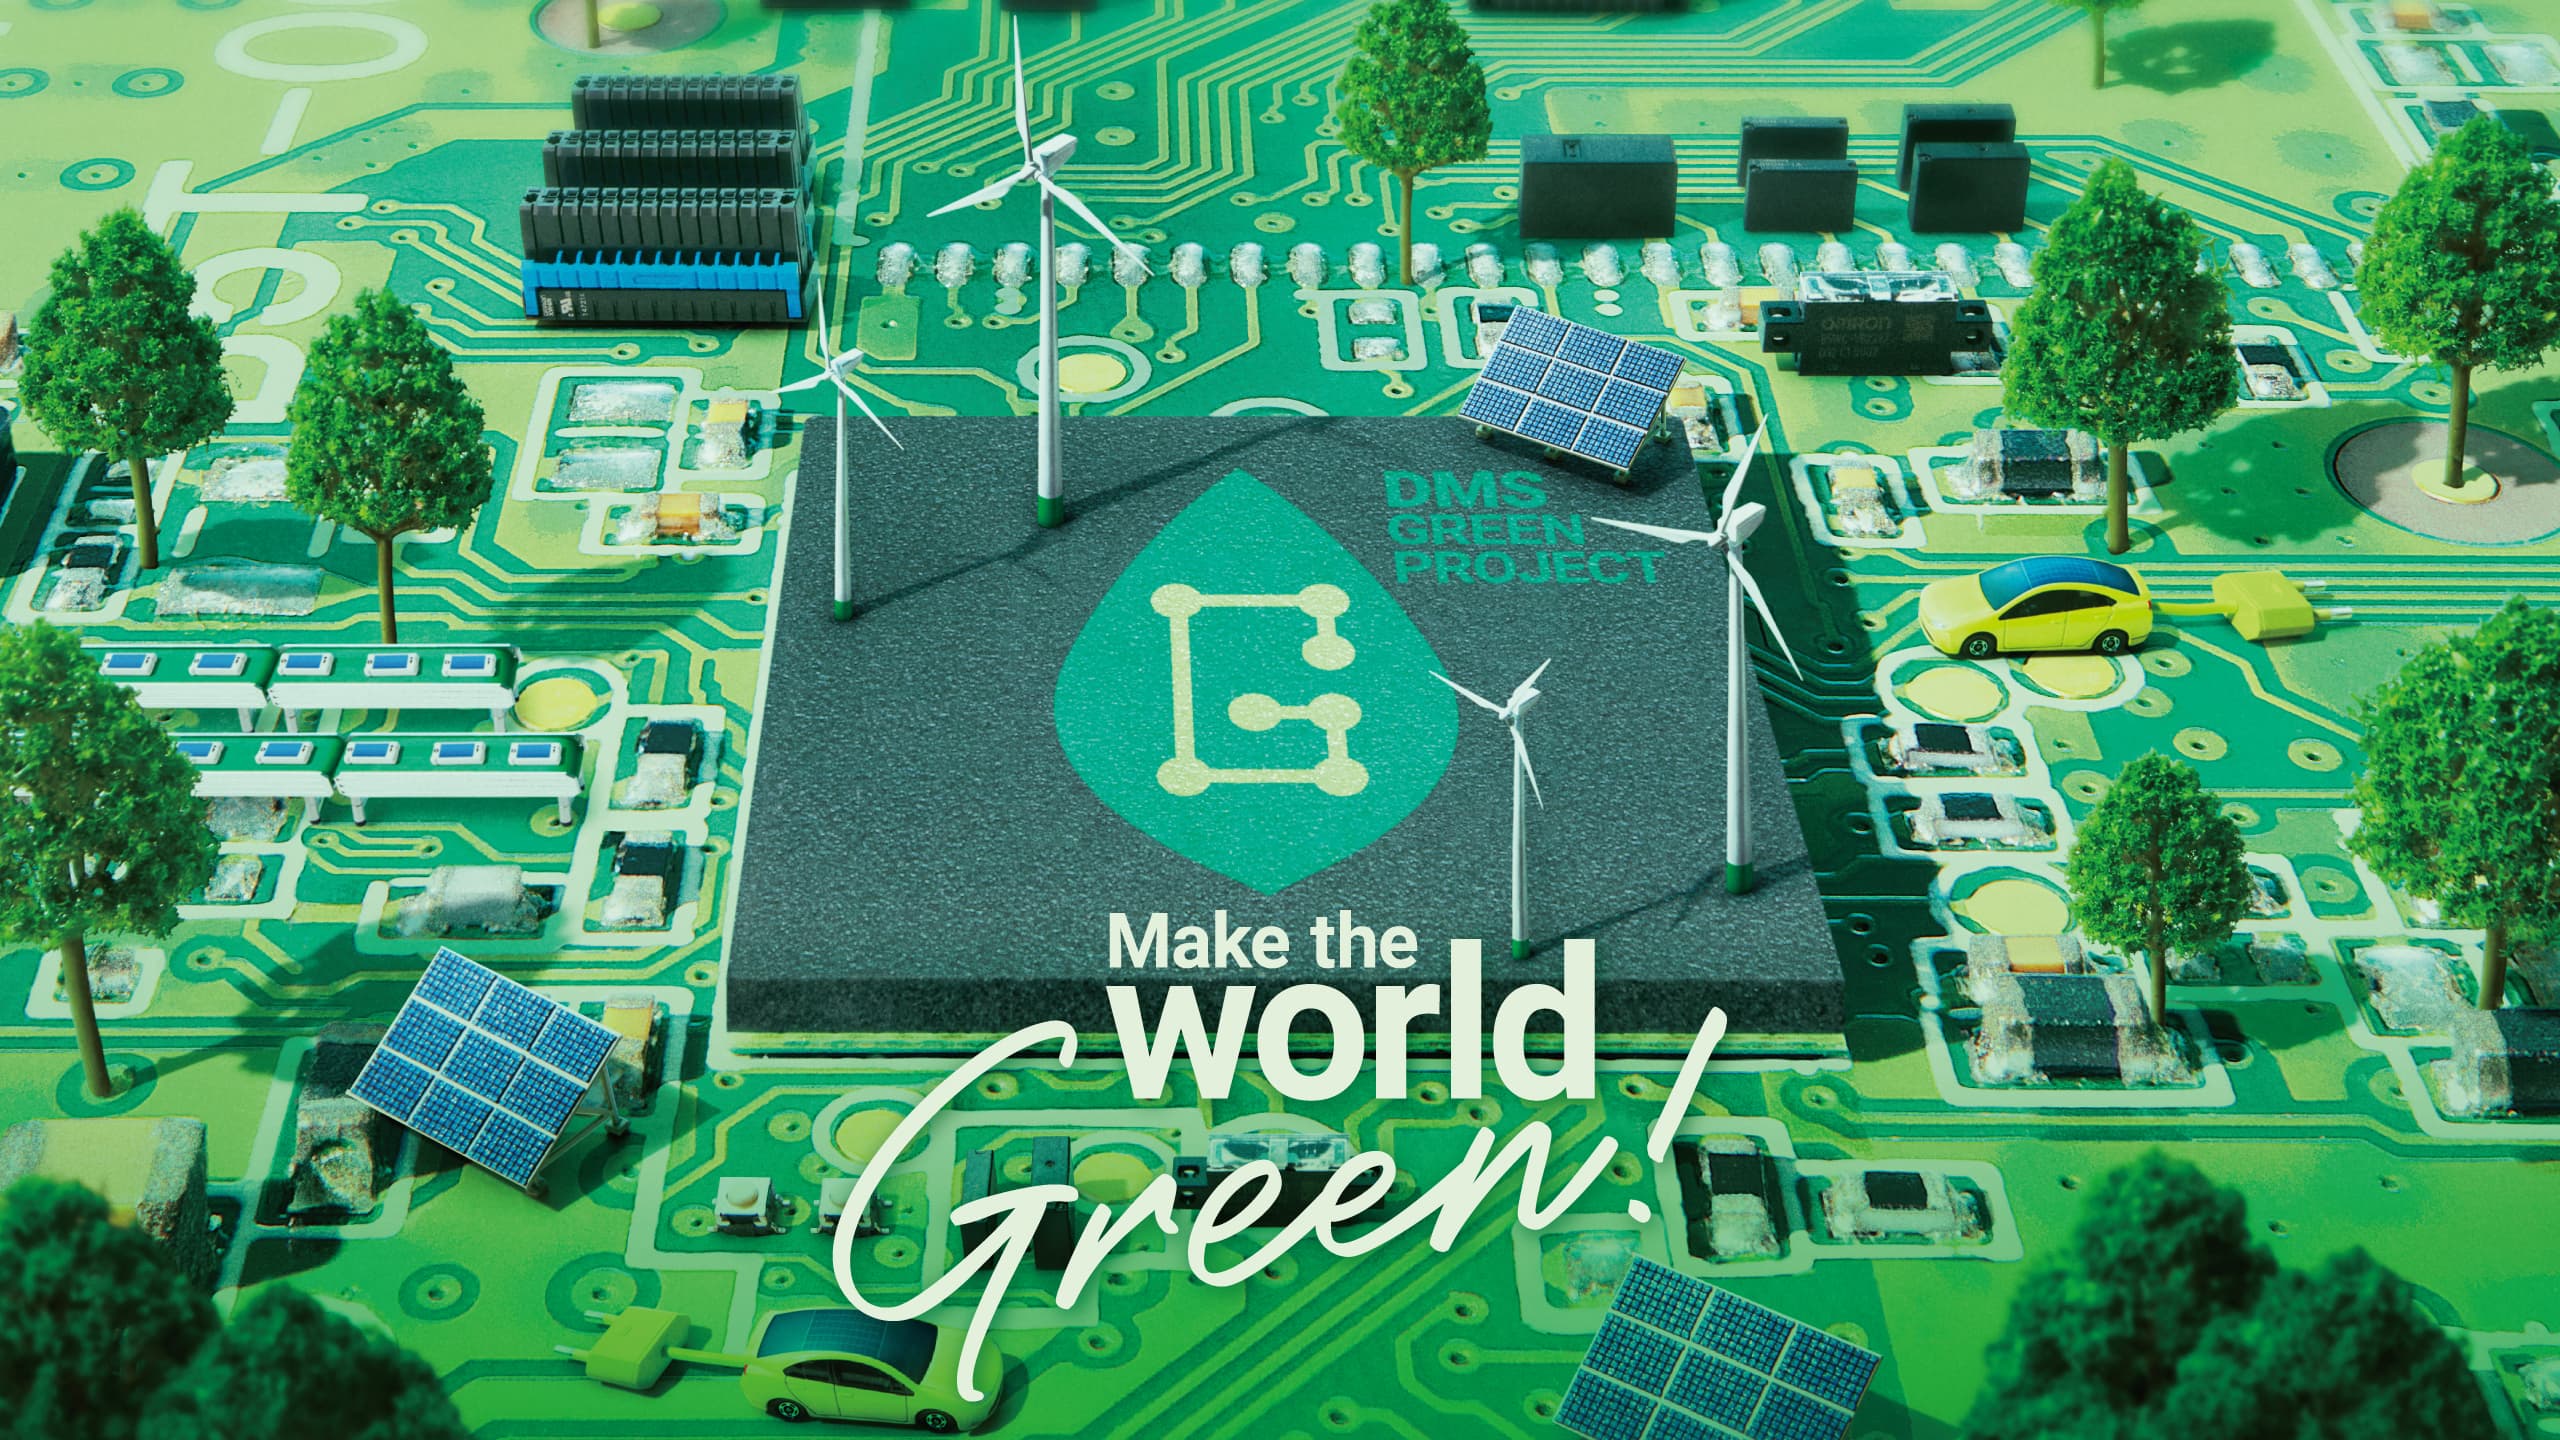 Make the world Green! DMS GREEN PROJECT